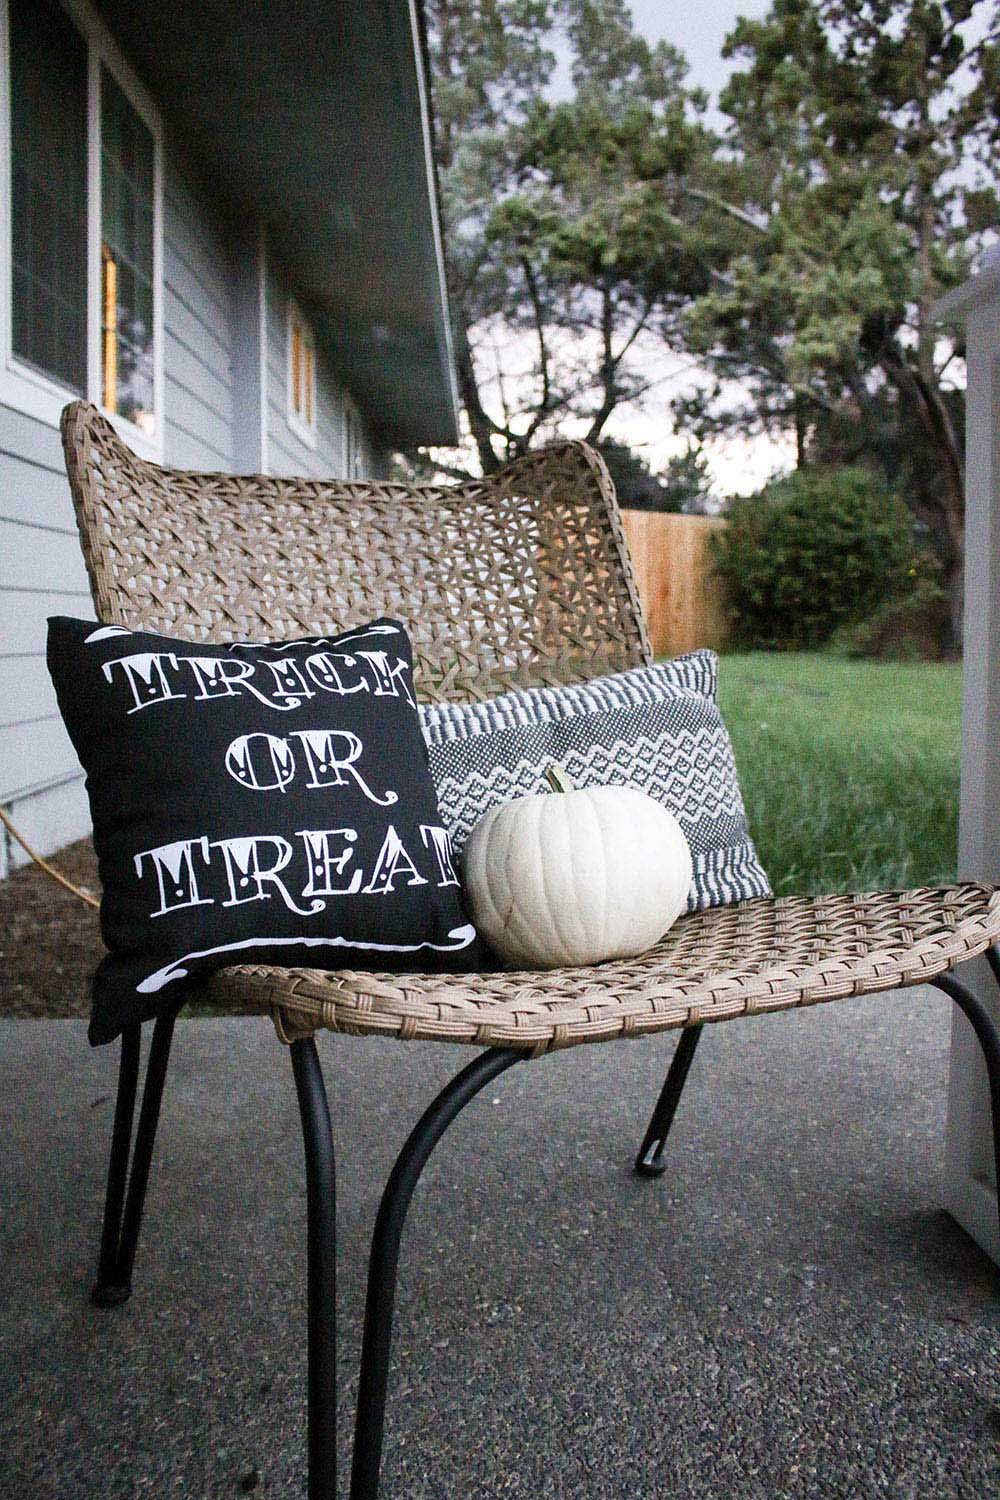 A chair decorated with pillows and a white pumpkin.